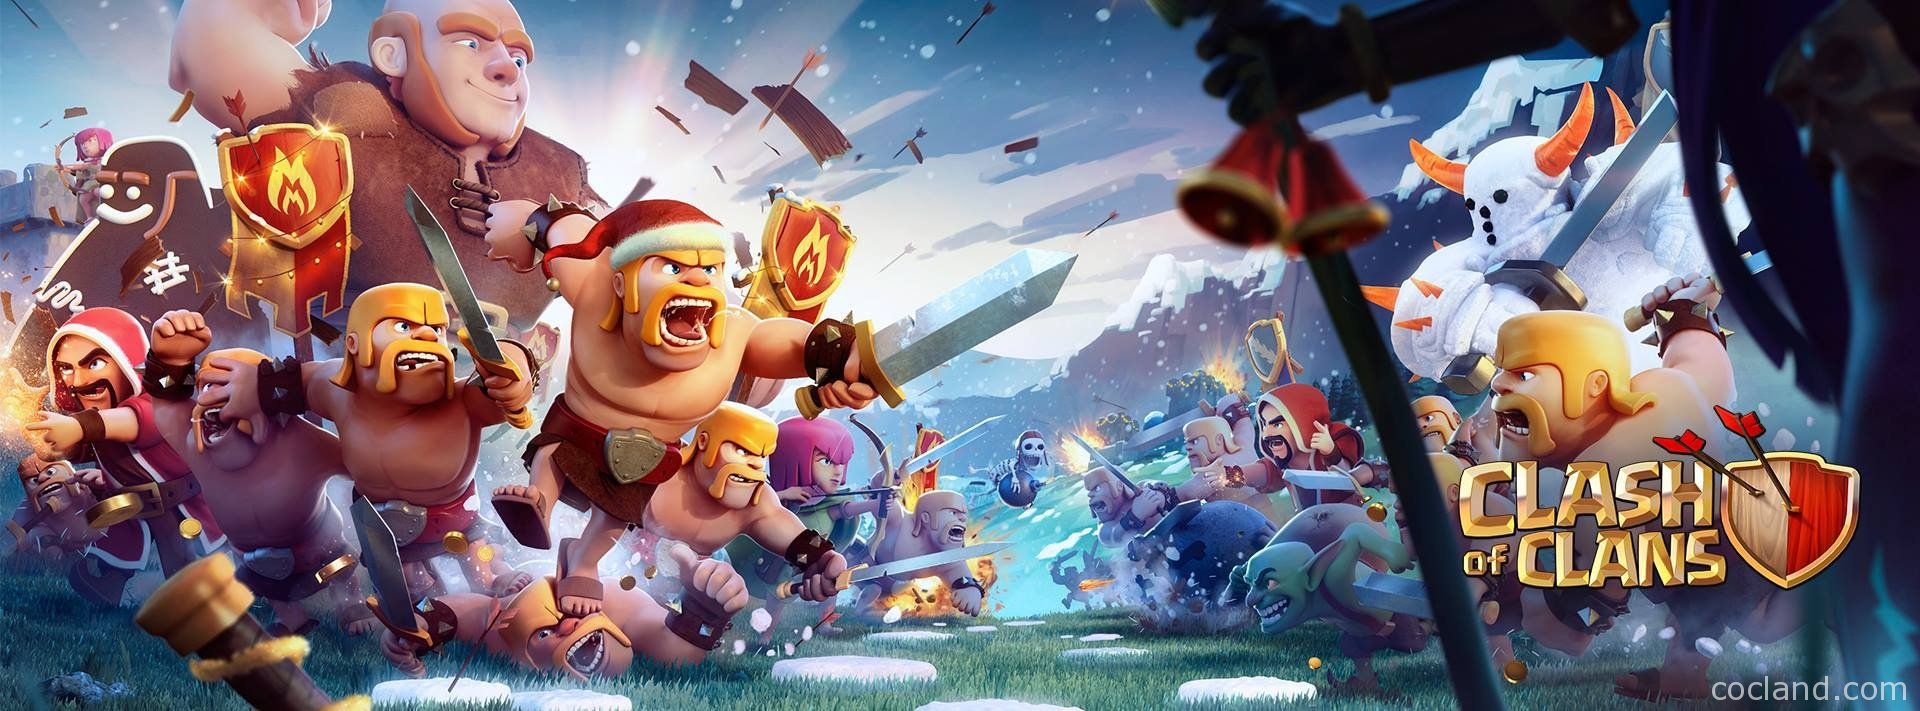 Free download Clash Of Clans Pekka Wallpaper Dota 2 and E Sports Geeks [1920x711] for your Desktop, Mobile & Tablet. Explore Clash Of Clans Wizard Wallpaper. Clash Of Clans